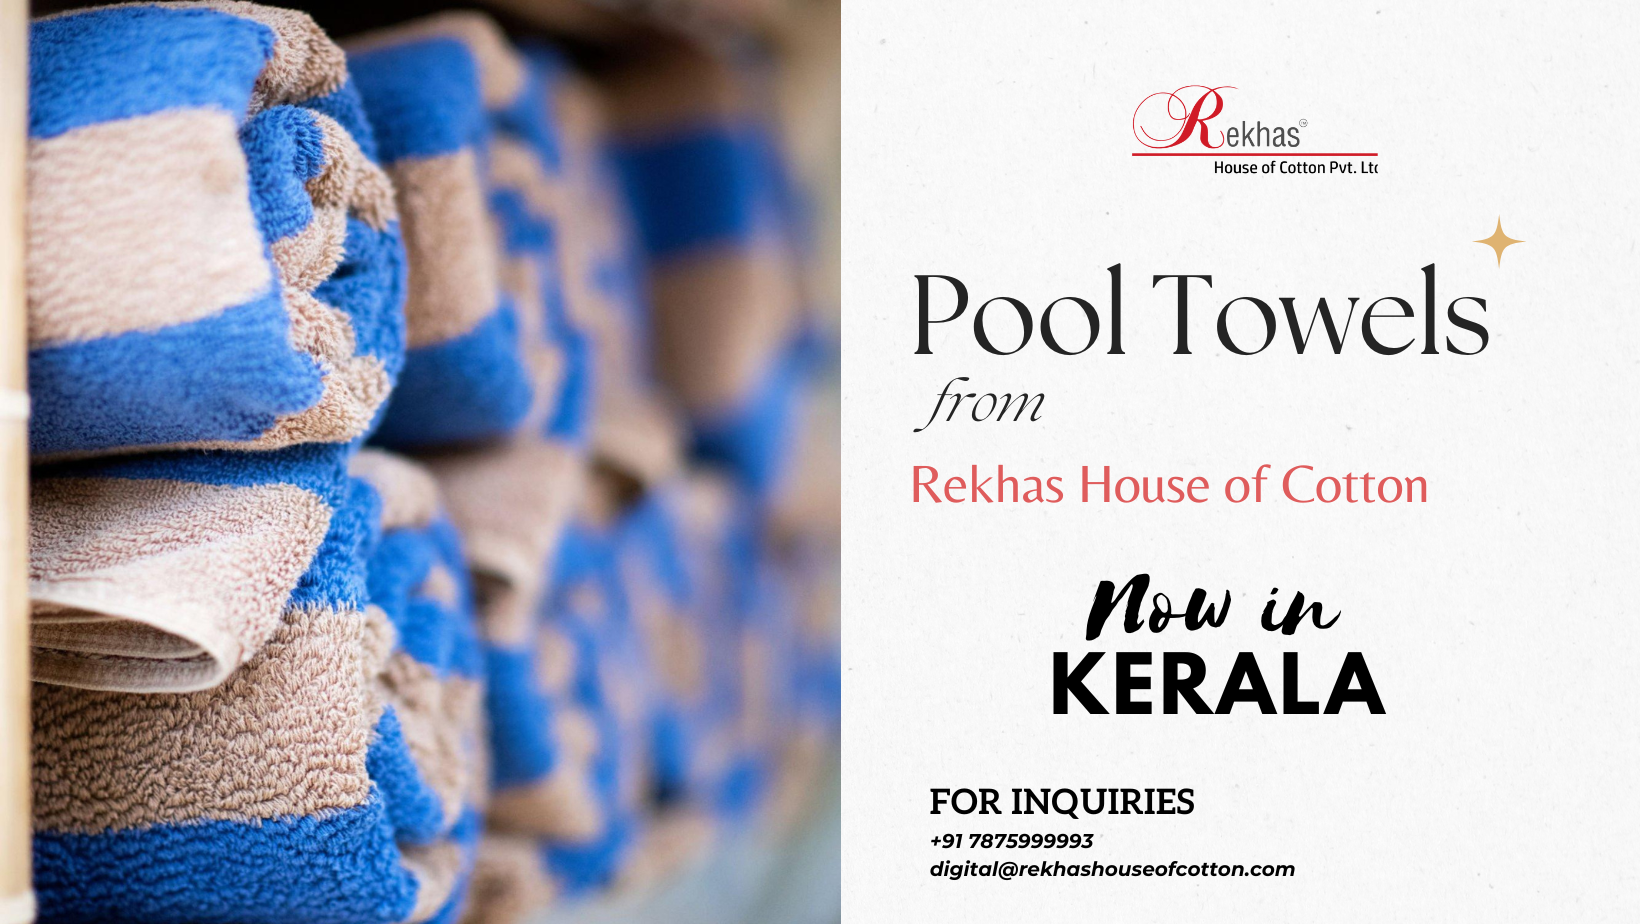 Get the best Pool towels in Kochi, Kerala at cheap & reasonable rate from Rekhas house of Cotton.